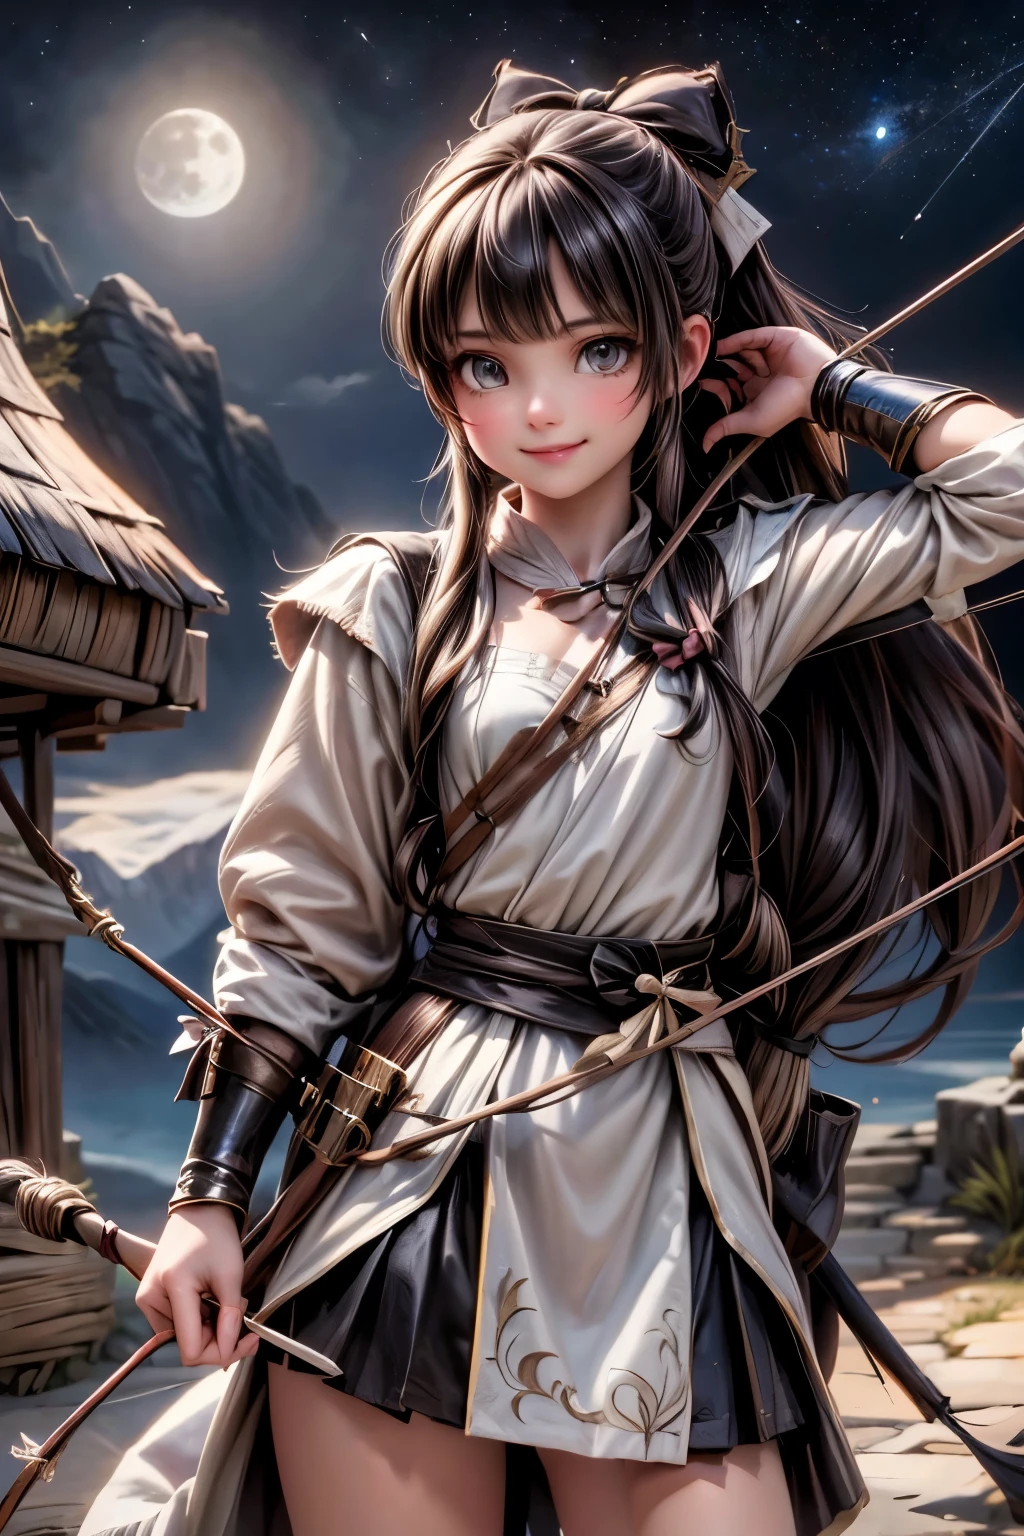 a cut archer girl smiling ((holding a bow)), girl holding a bow, archery bow, a falcon perched on the bow, fantasy art style, at night, nighs scenery, moon, starry sky